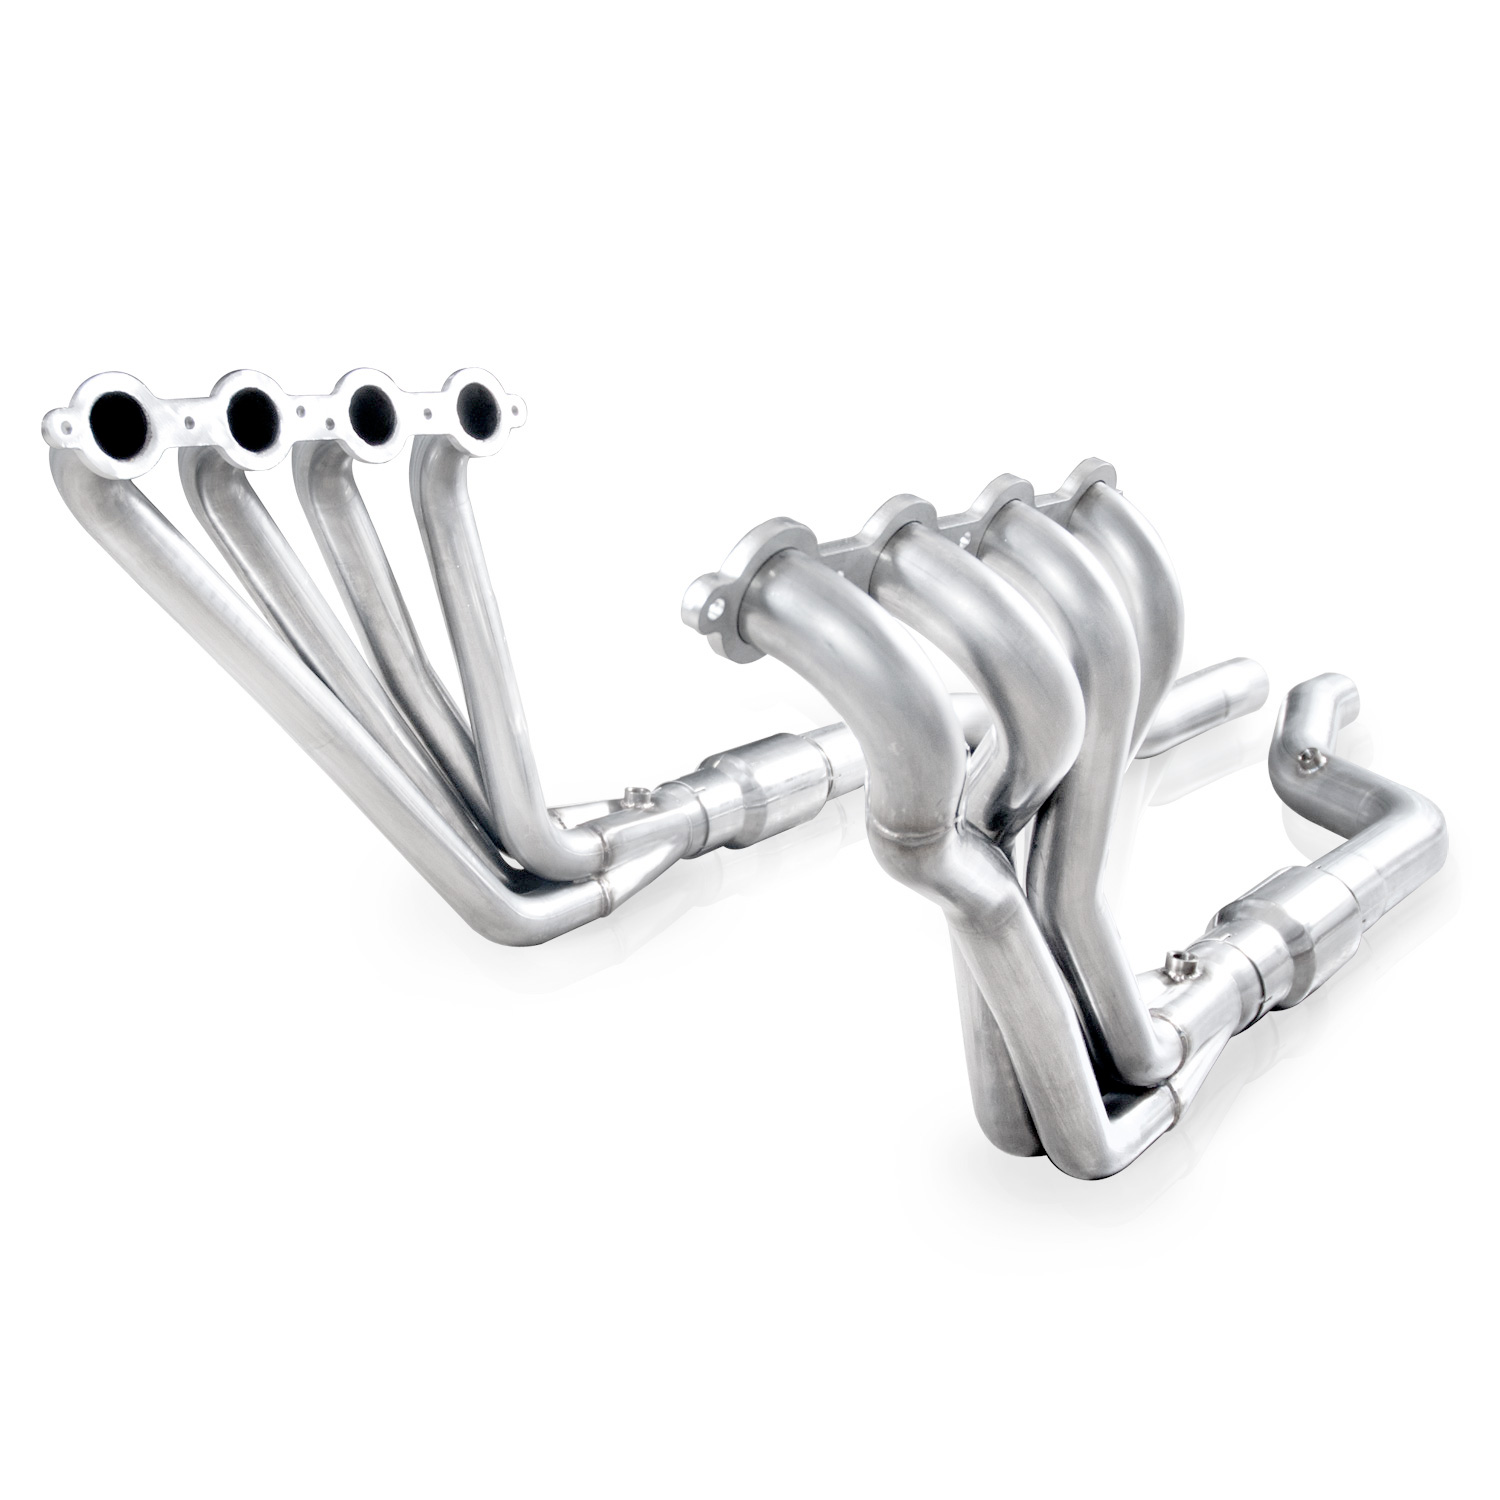 2010-2015 Camaro 6.2L SW Headers 1-7/8" With Catted Leads Performance Connect